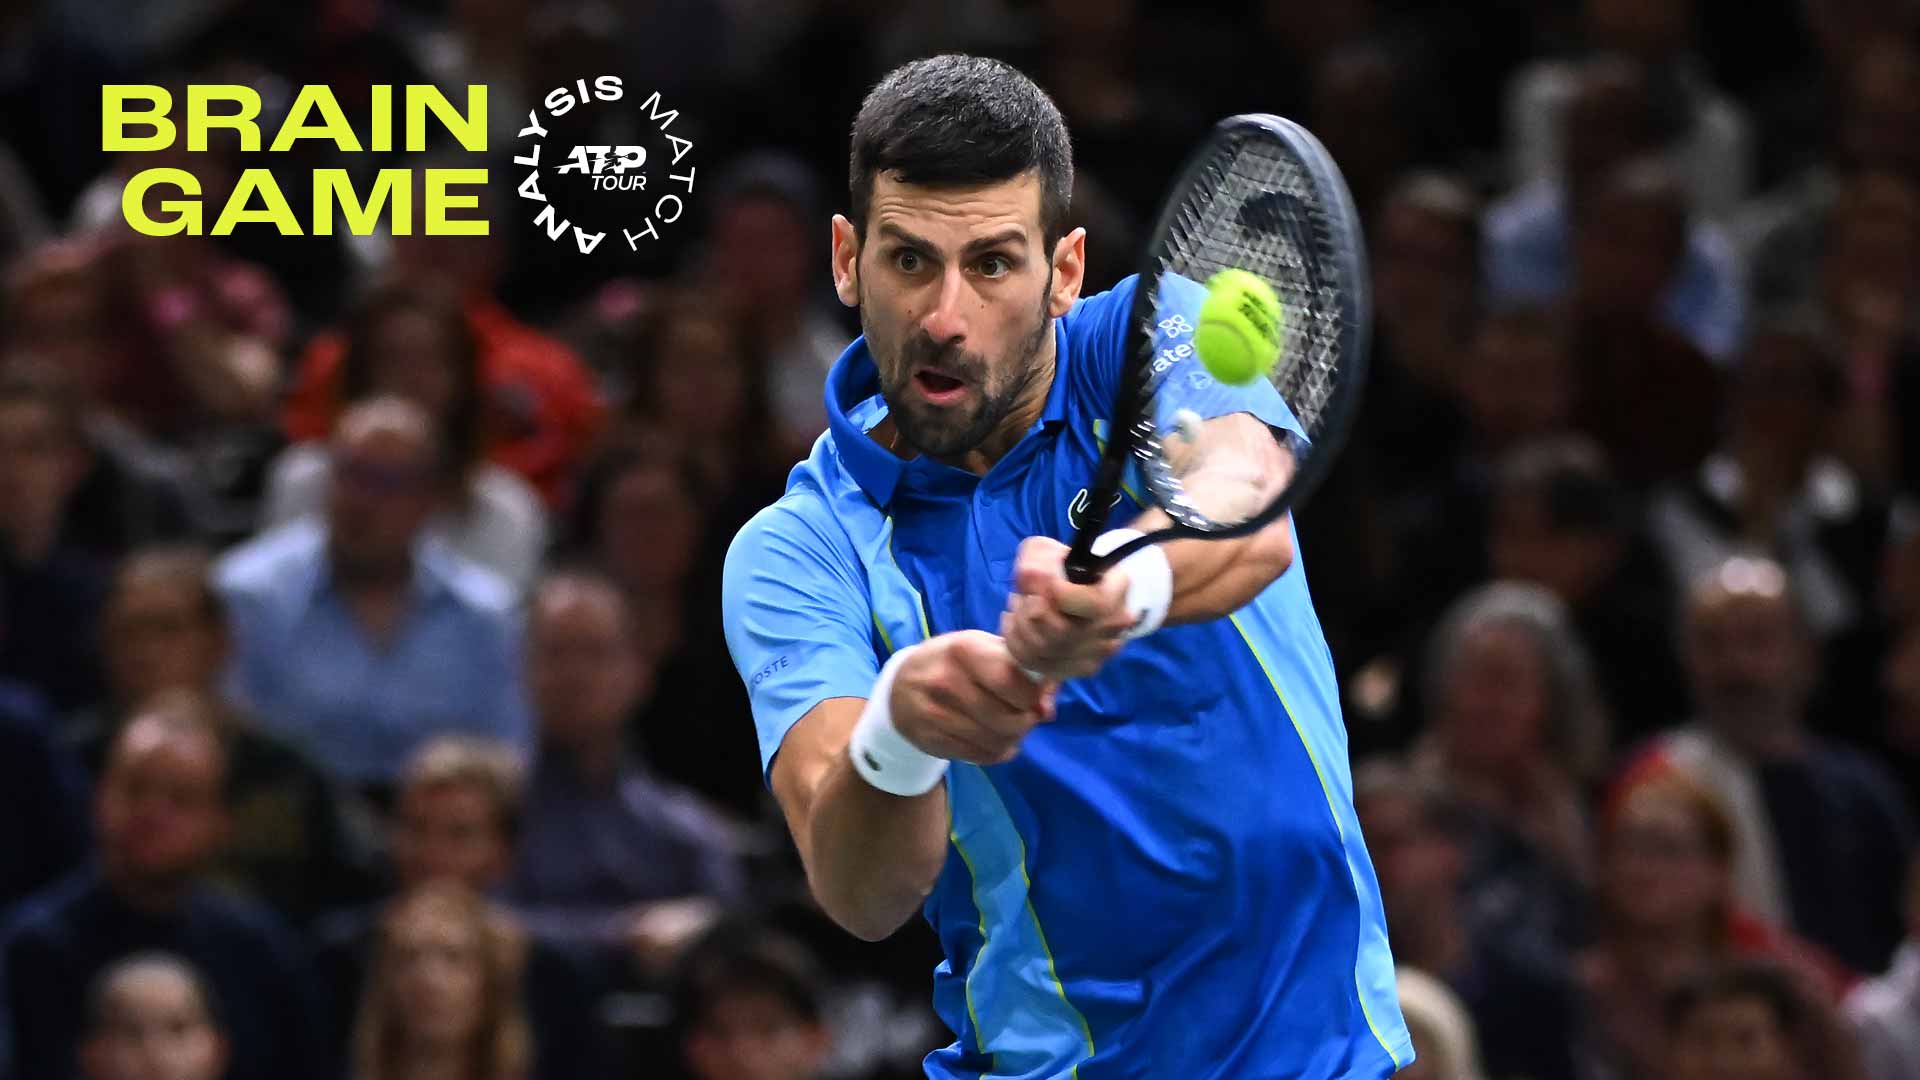 Novak Djokovic hits 57 per cent of his groundstrokes from the backhand side en route to victory over Grigor Dimitrov in the Paris final.